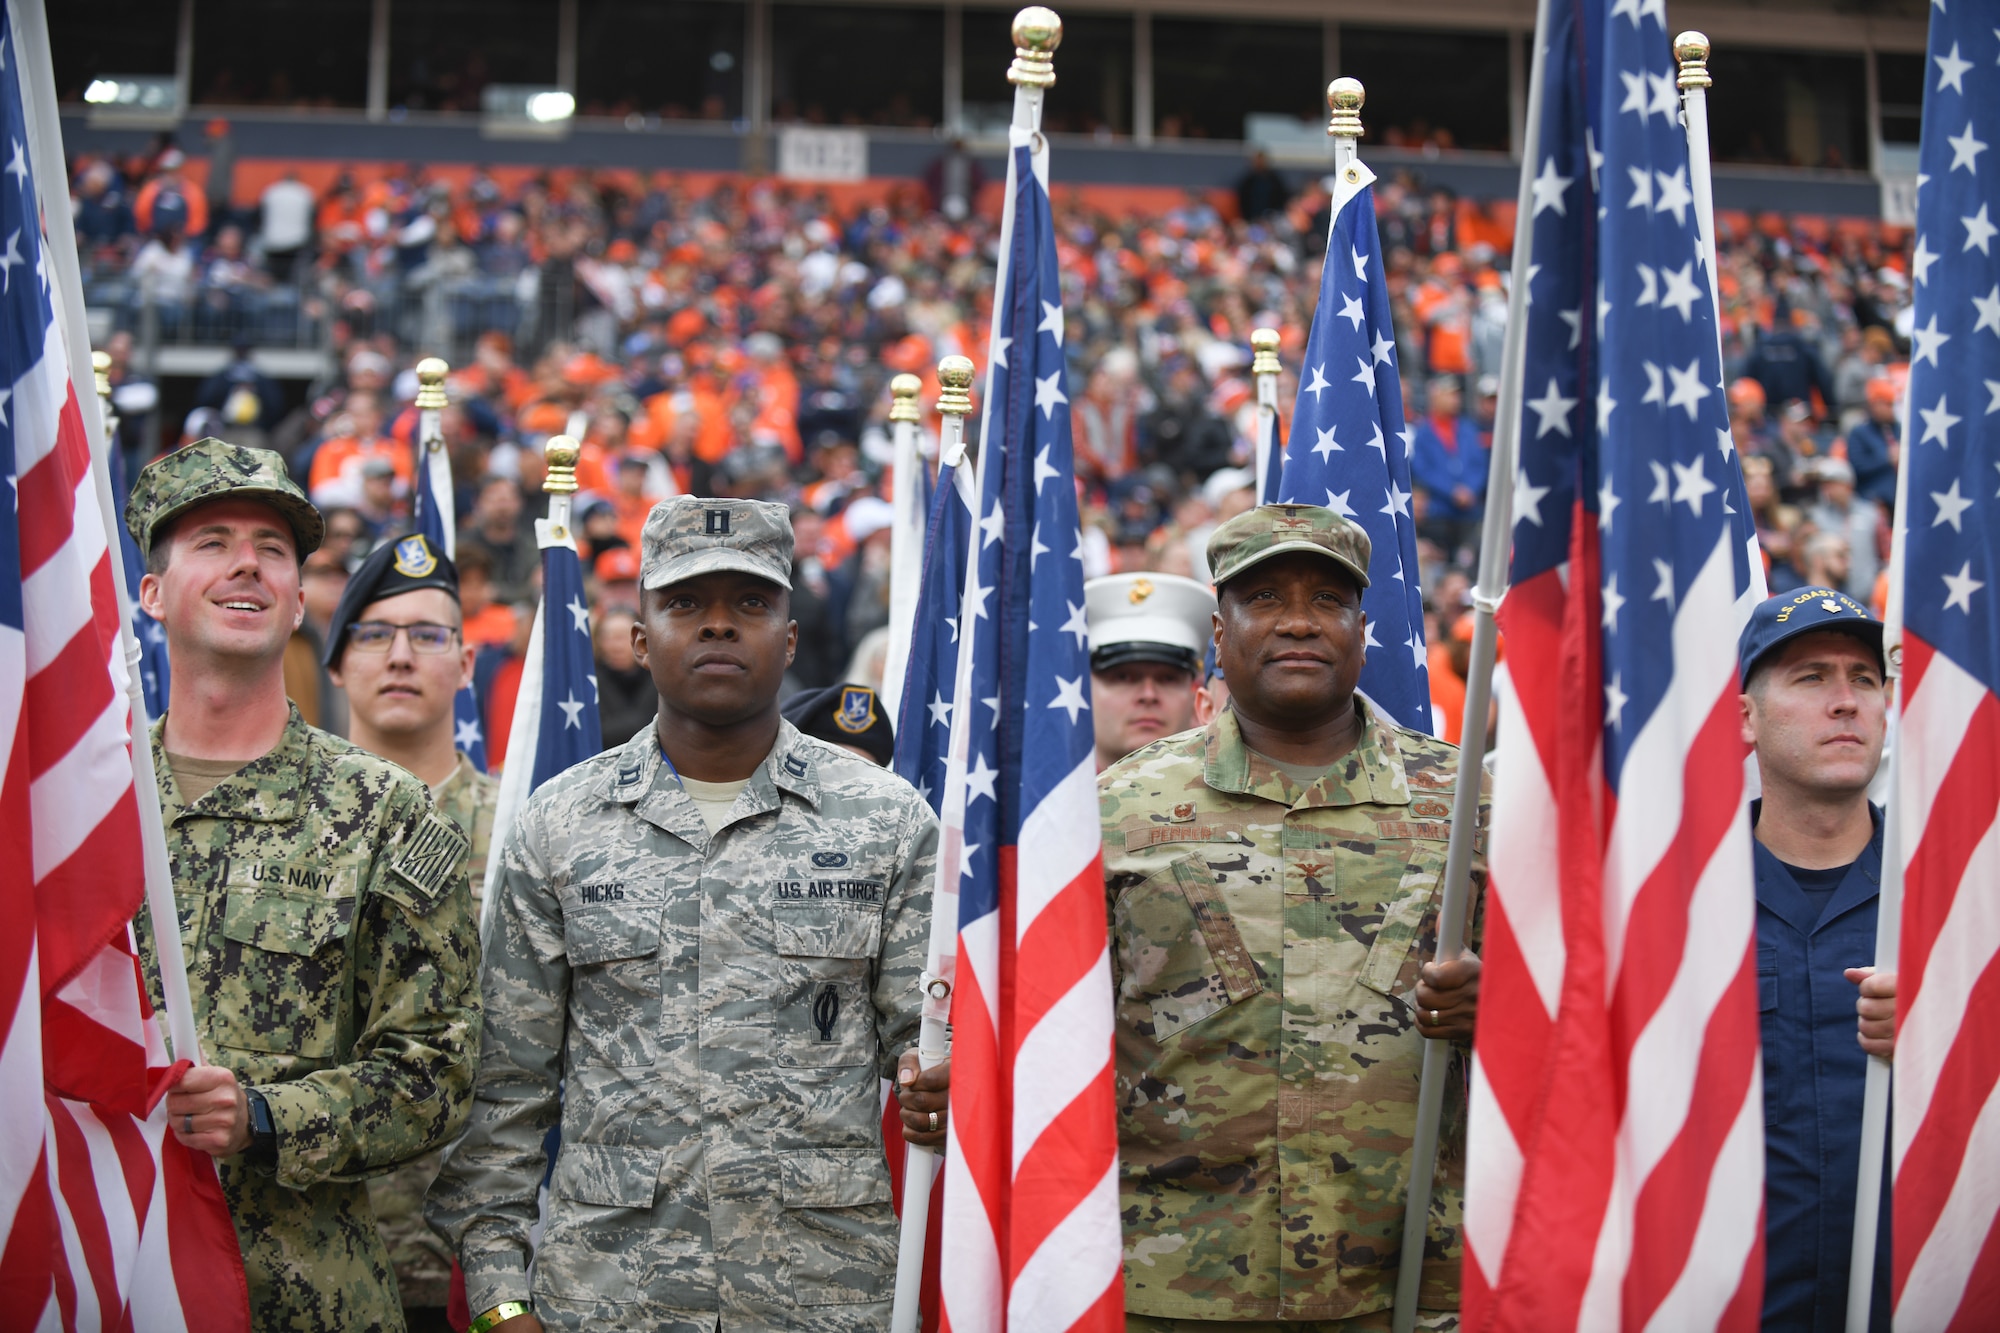 U.S. military service members hold American flags before the Denver Broncos Salute to Service game at Empower Field at Mile High in Denver, Nov. 3, 2019.